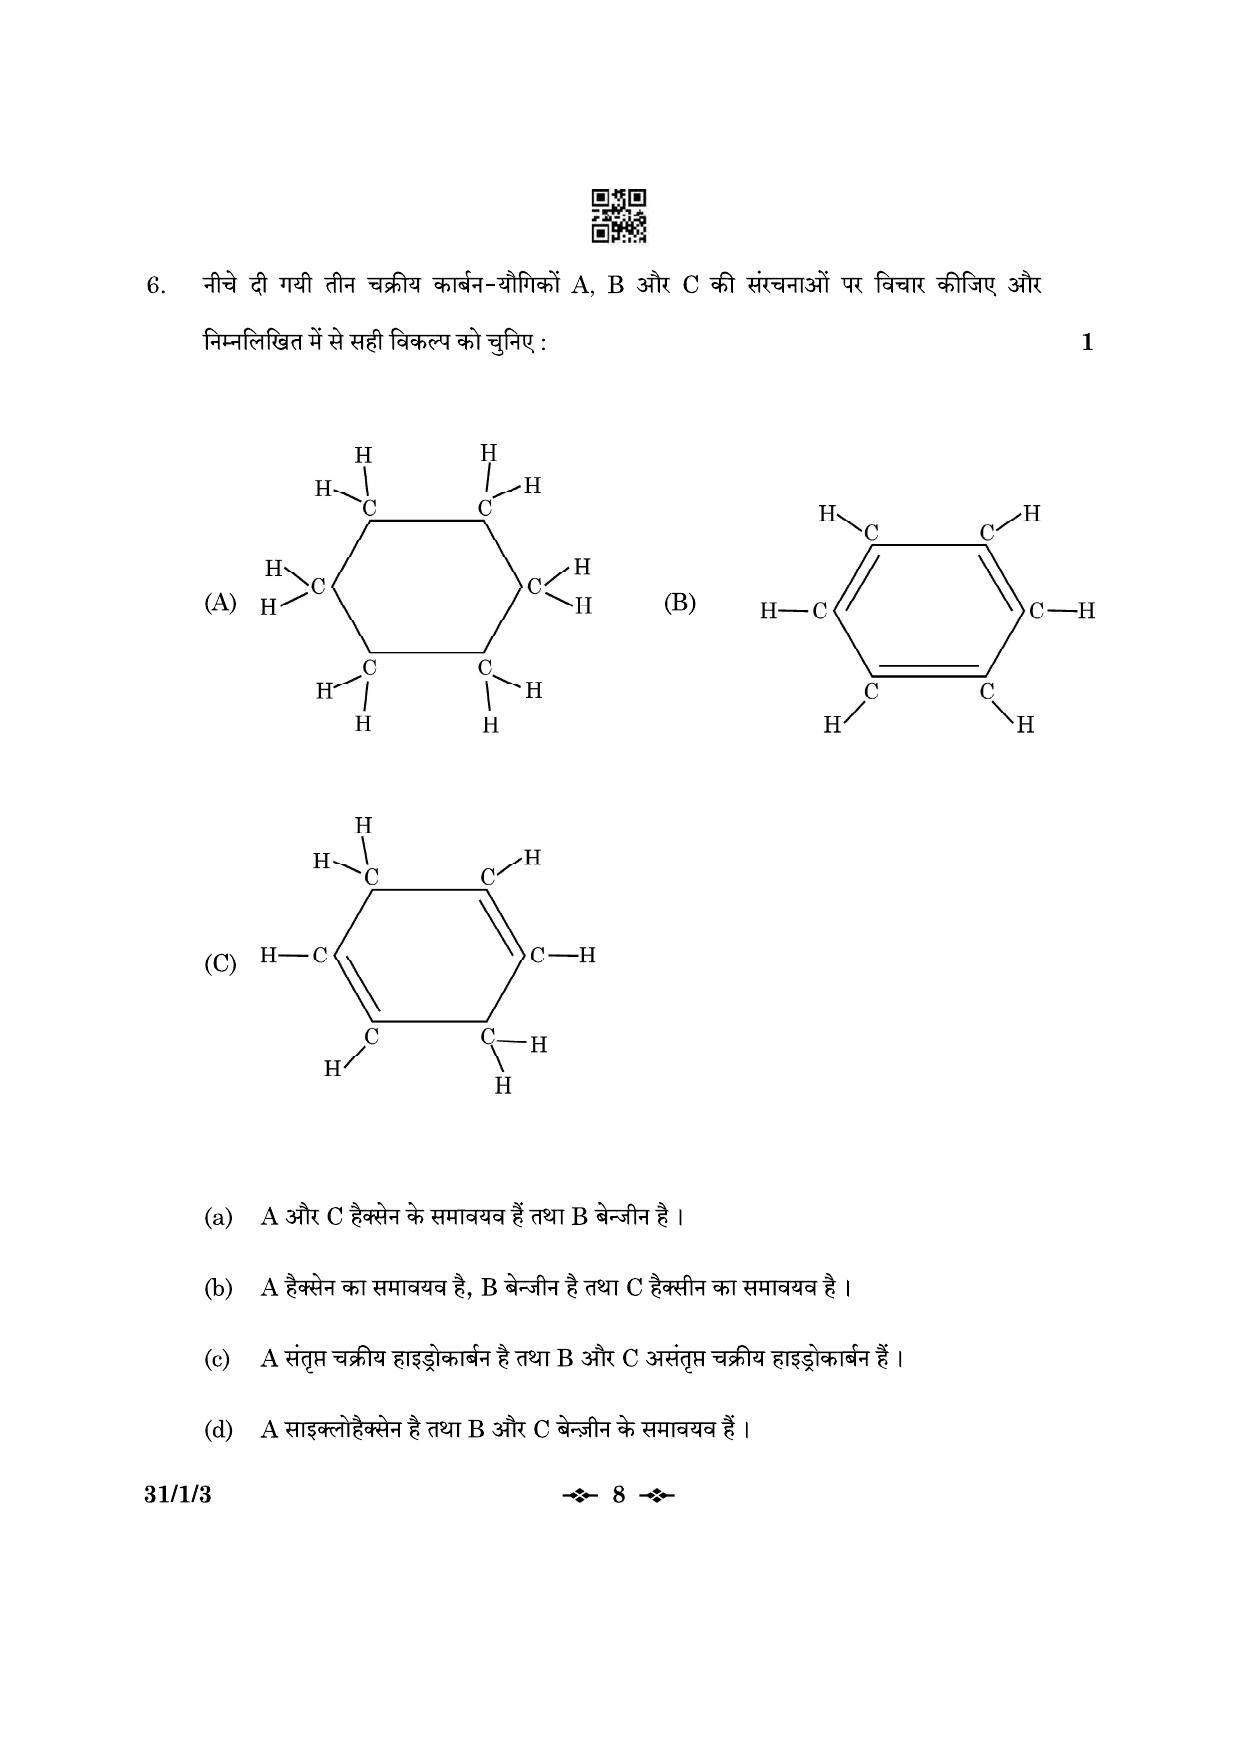 CBSE Class 10 31-1-3 Science 2023 Question Paper - Page 8